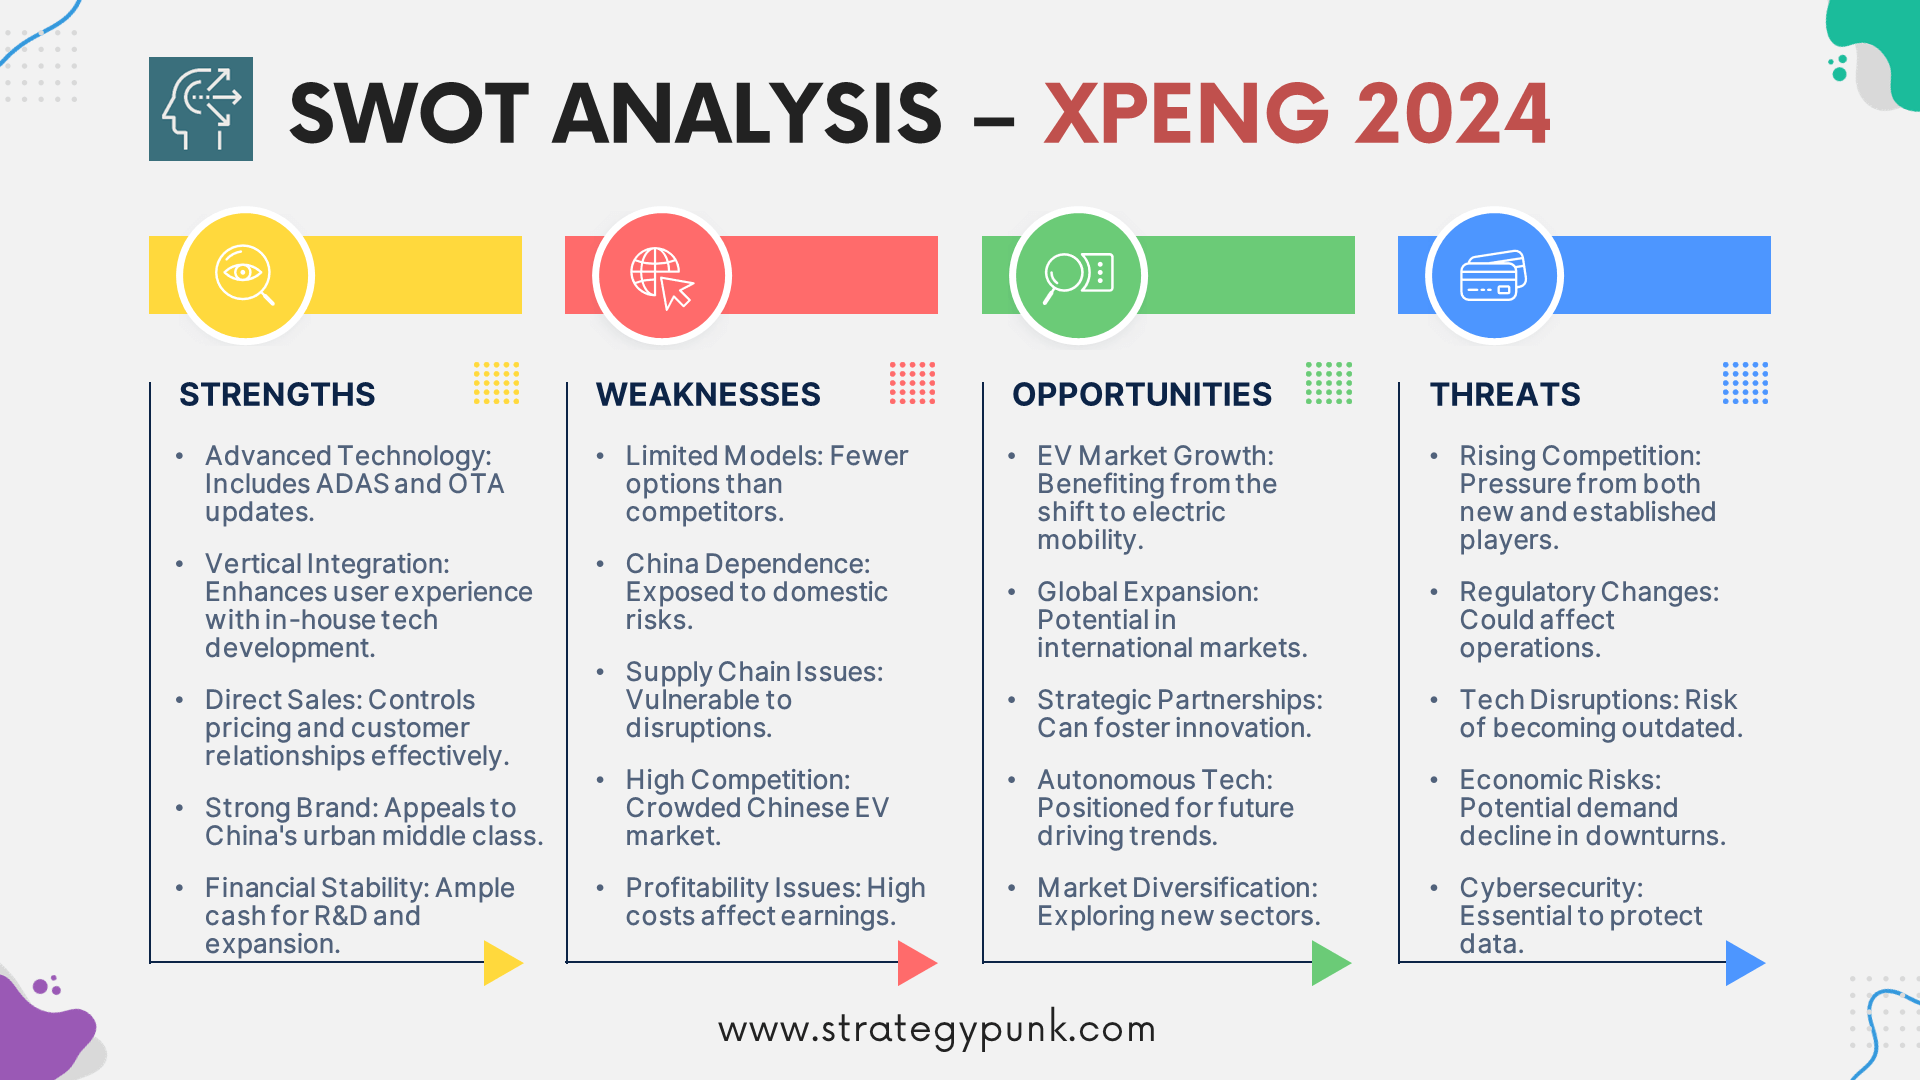 Xpeng SWOT Analysis: Free PPT Template and In-Depth Insights (free file)